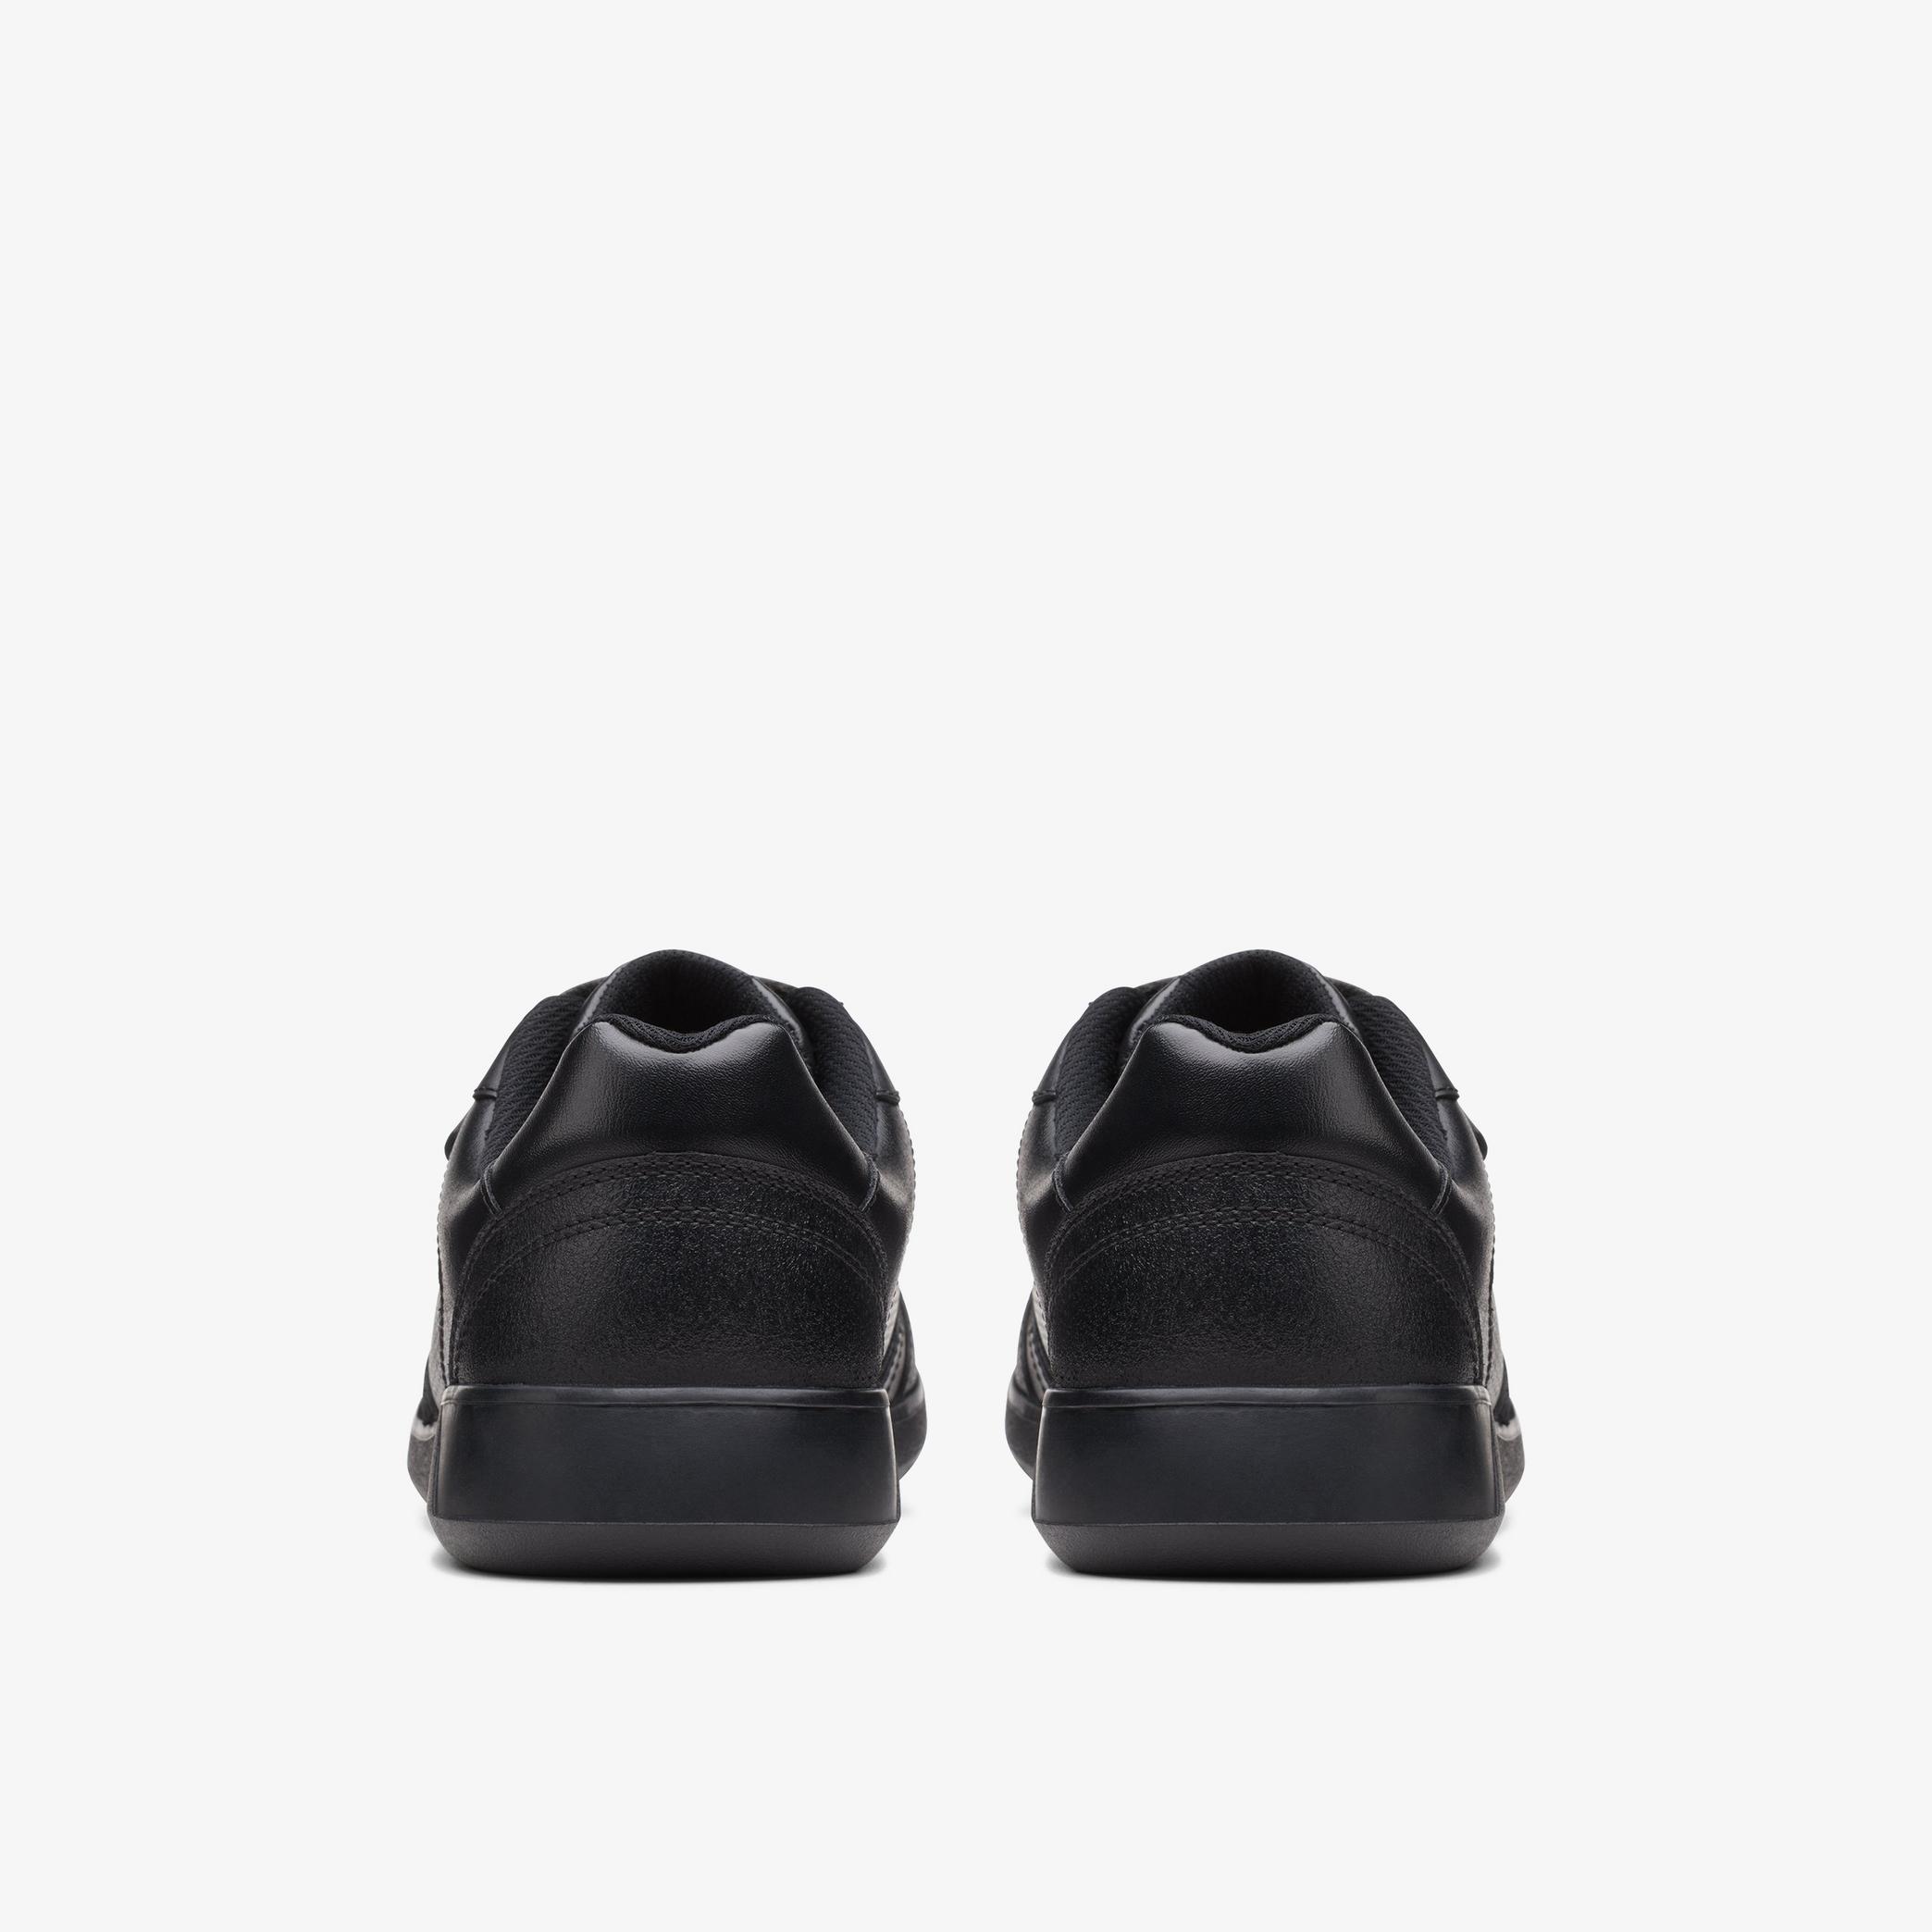 Boys Scape Bright Youth Black Leather Shoes | Clarks UK